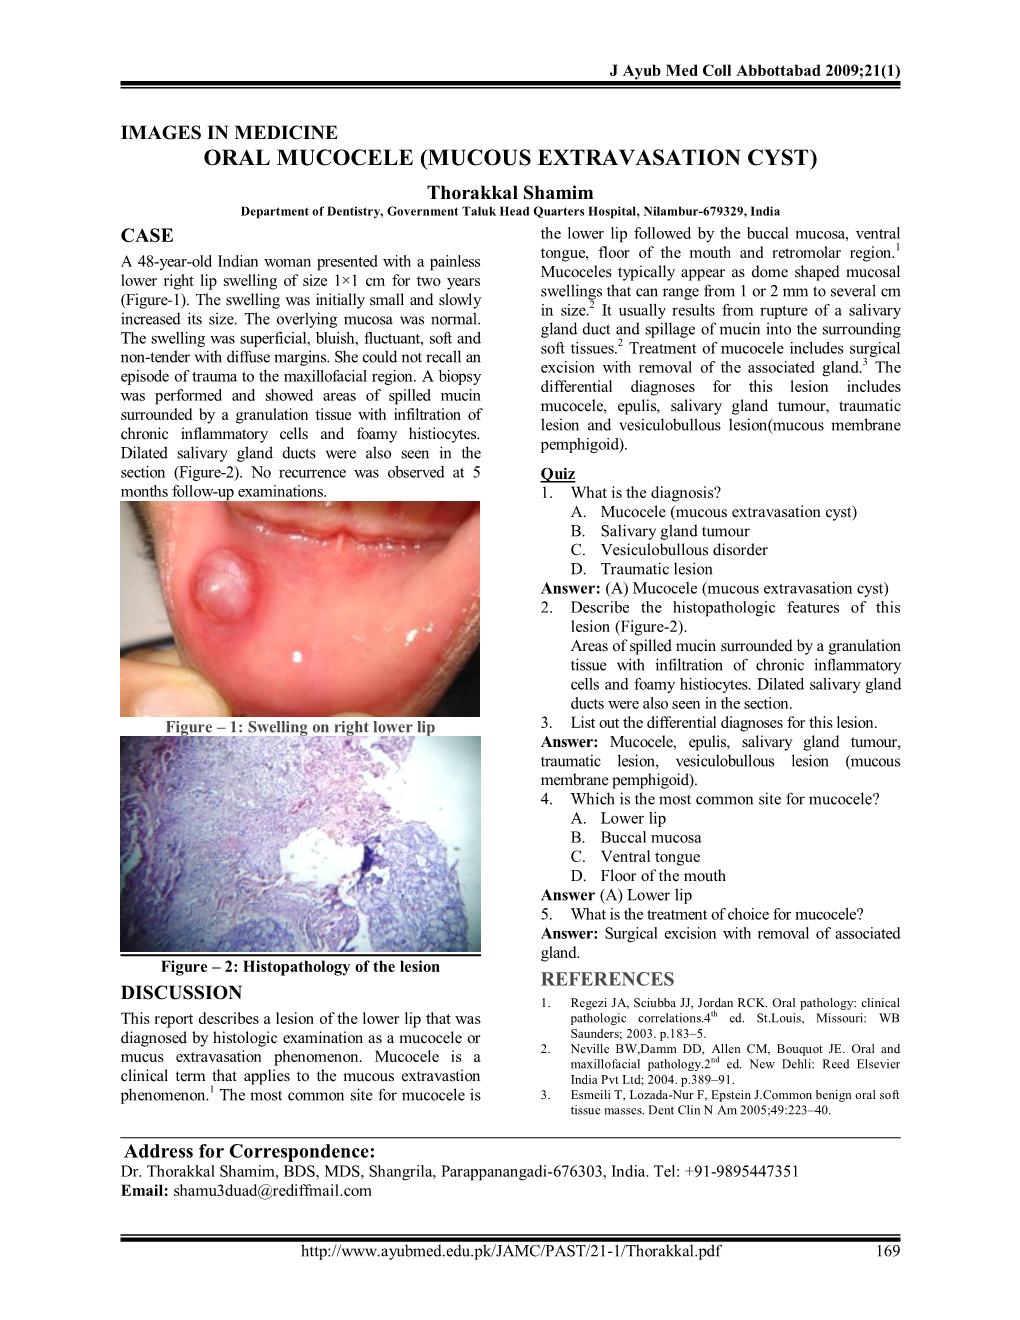 Oral Mucocele (Mucous Extravasation Cyst)